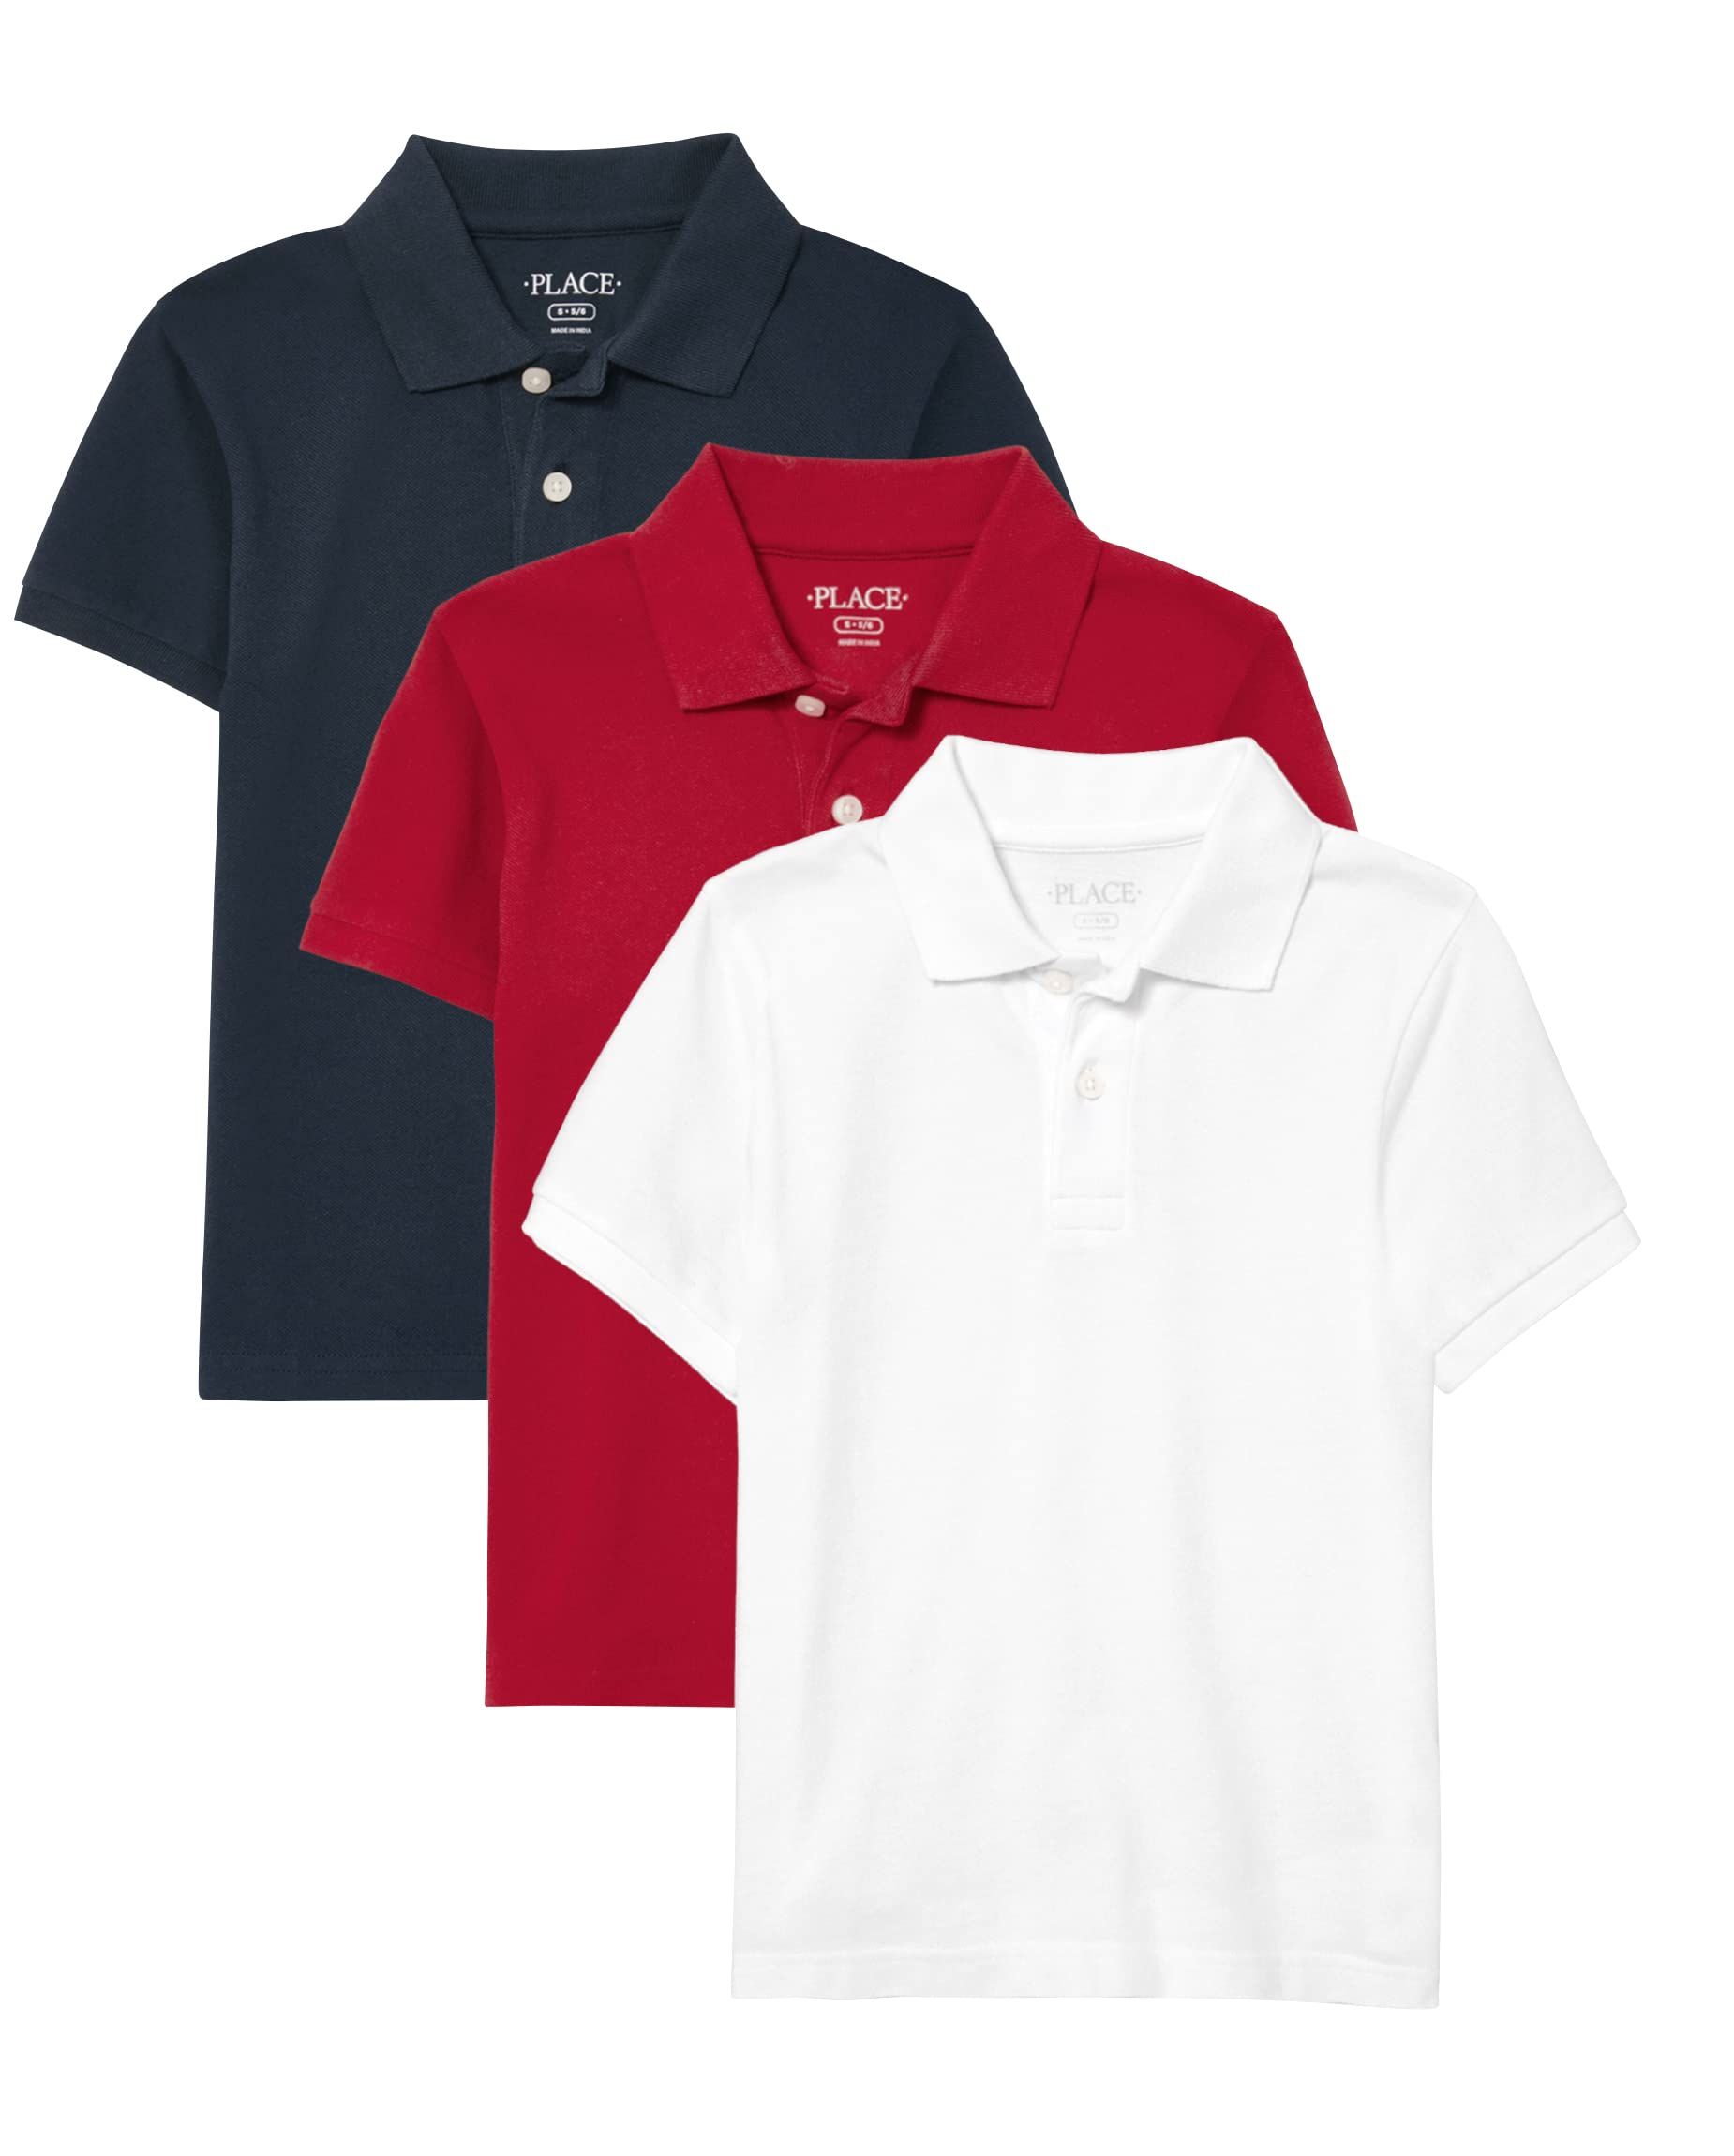 The Children's Place Boys' Short Sleeve Pique Polo 3-Pack